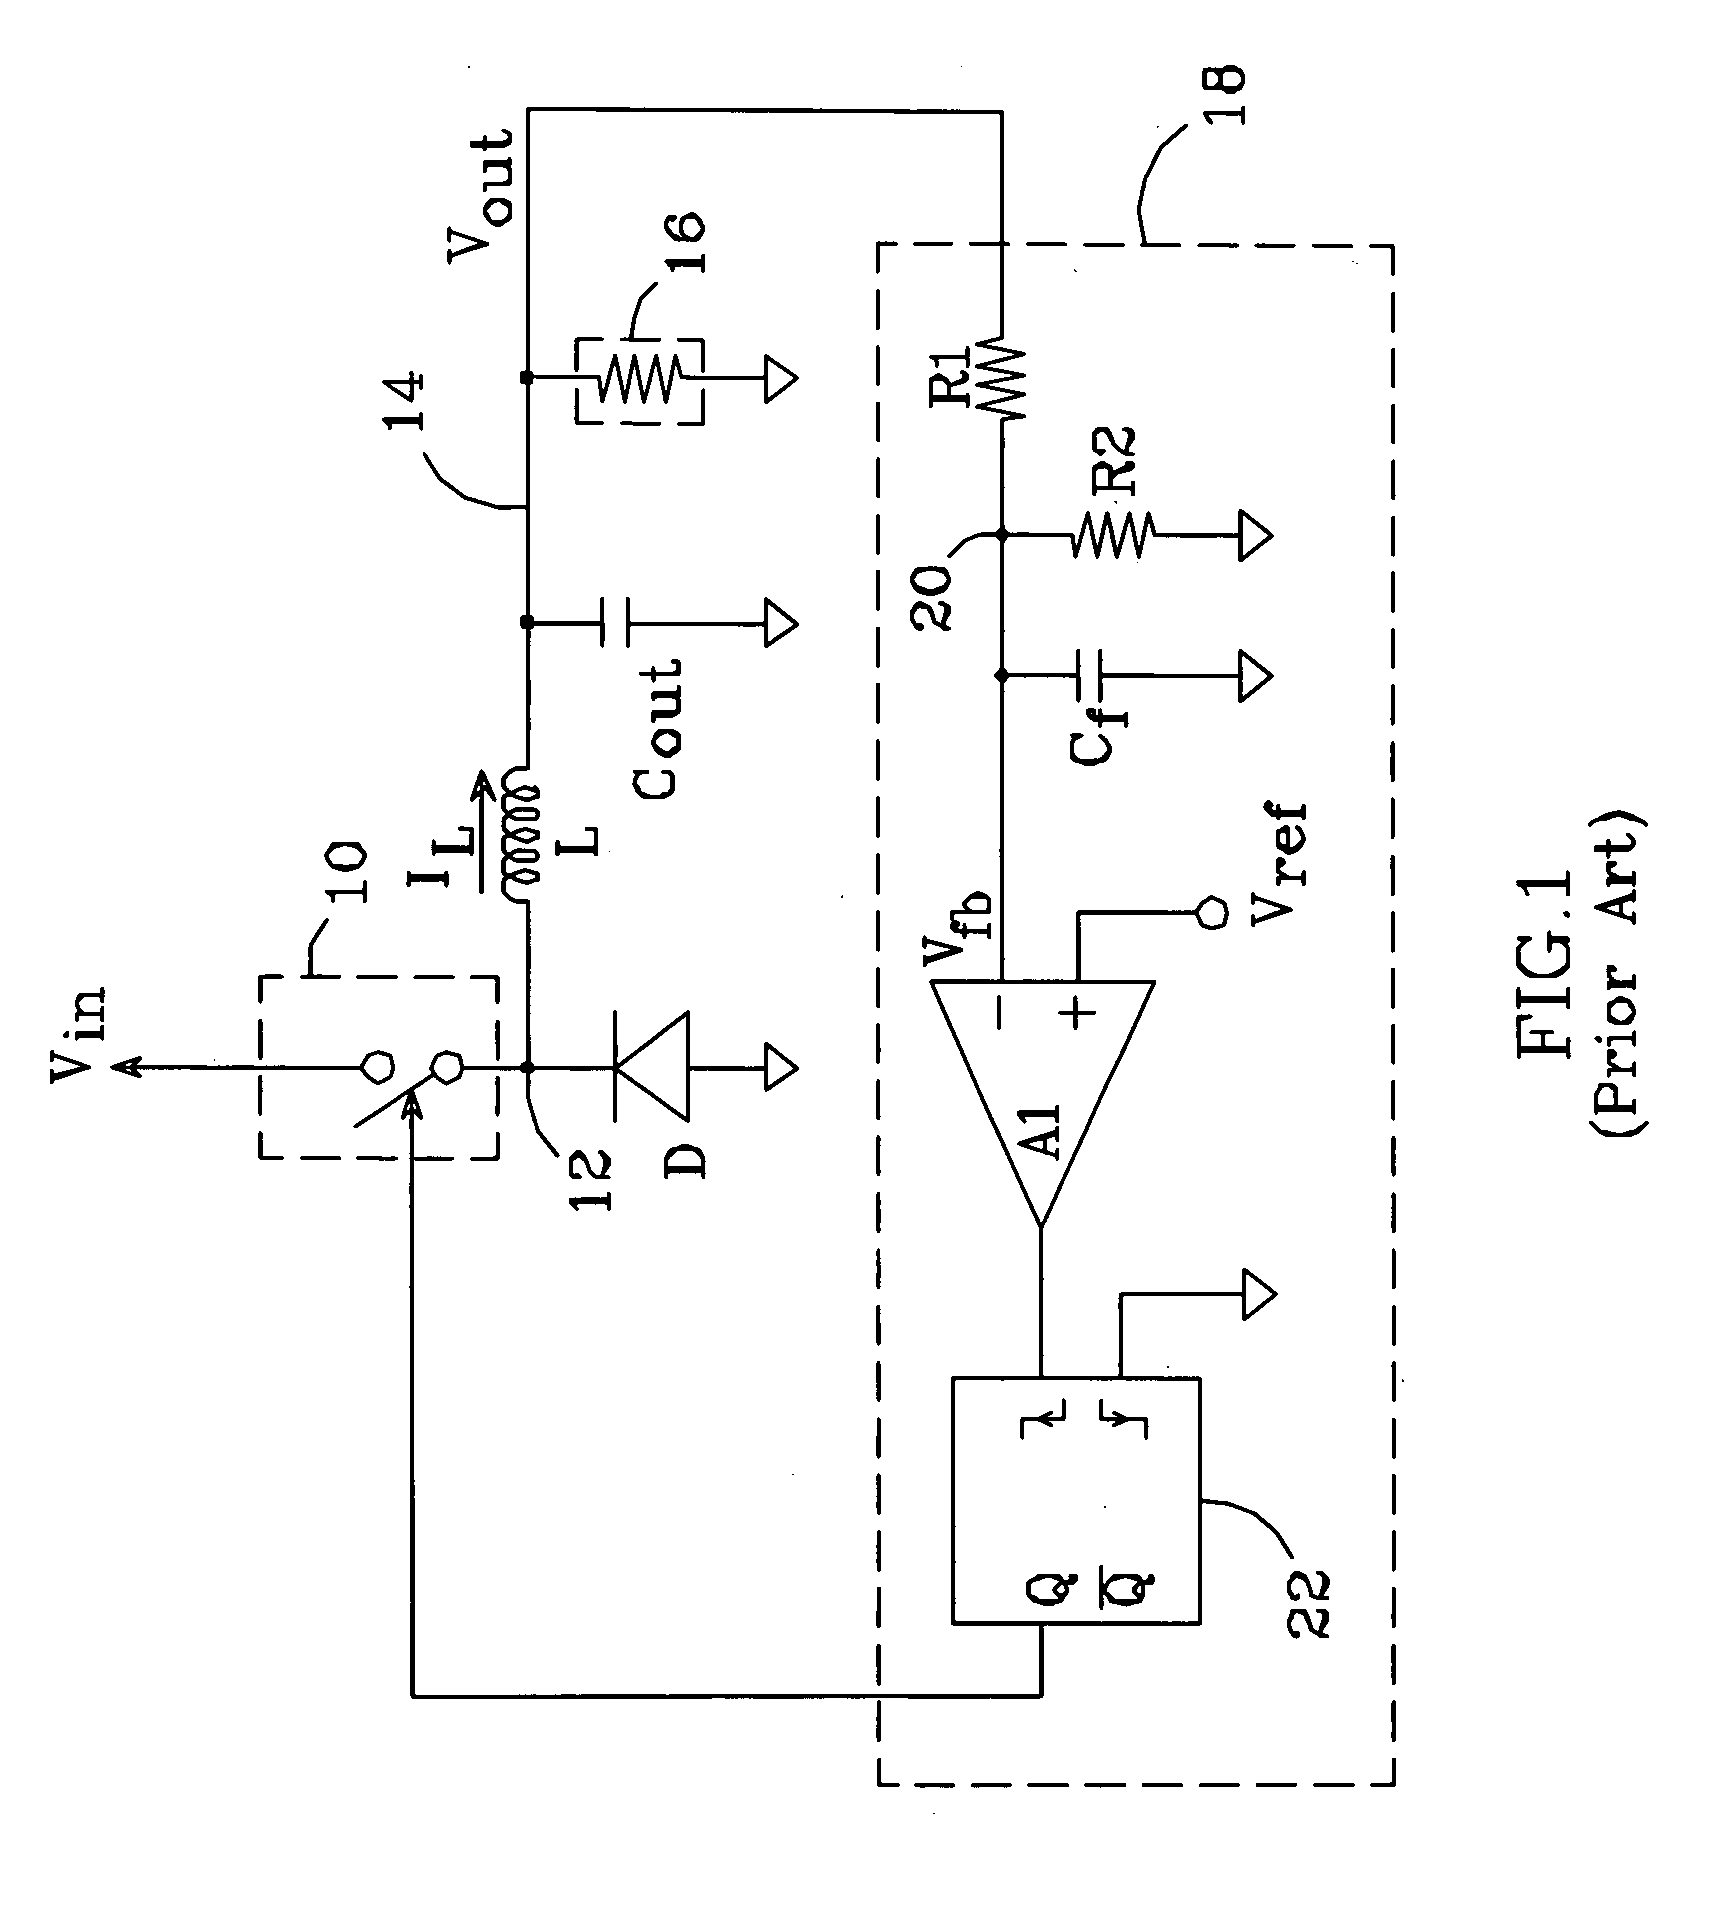 Switched noise filter circuit for a DC-DC converter